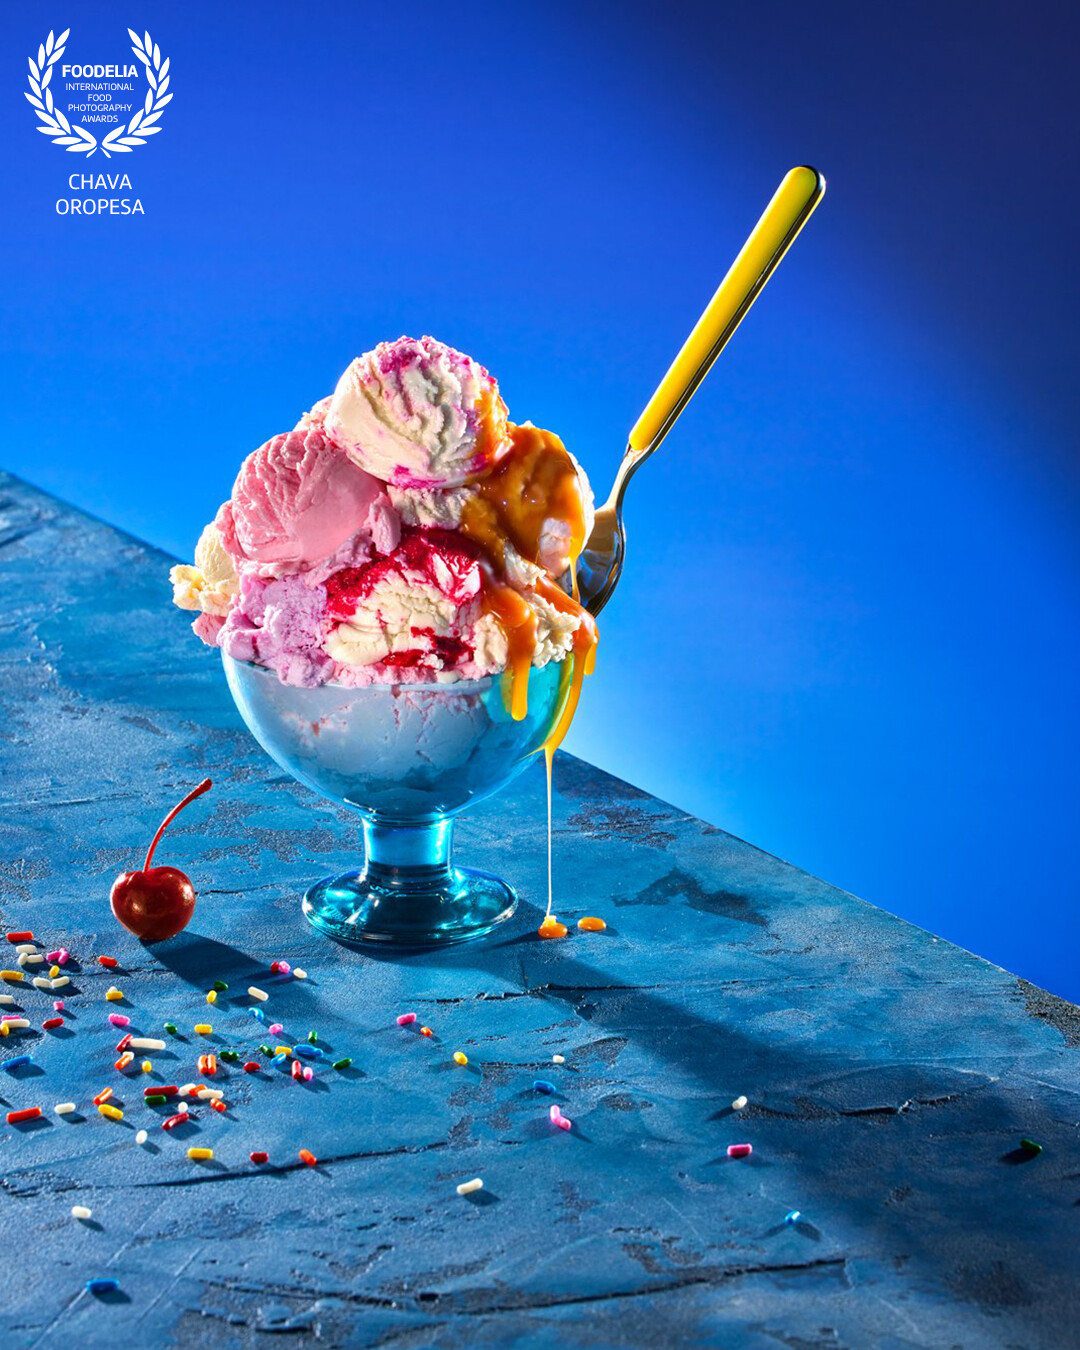 Personal work, playing with ice cream and bold colors.<br />
Food Styling: Mariana Swedelson